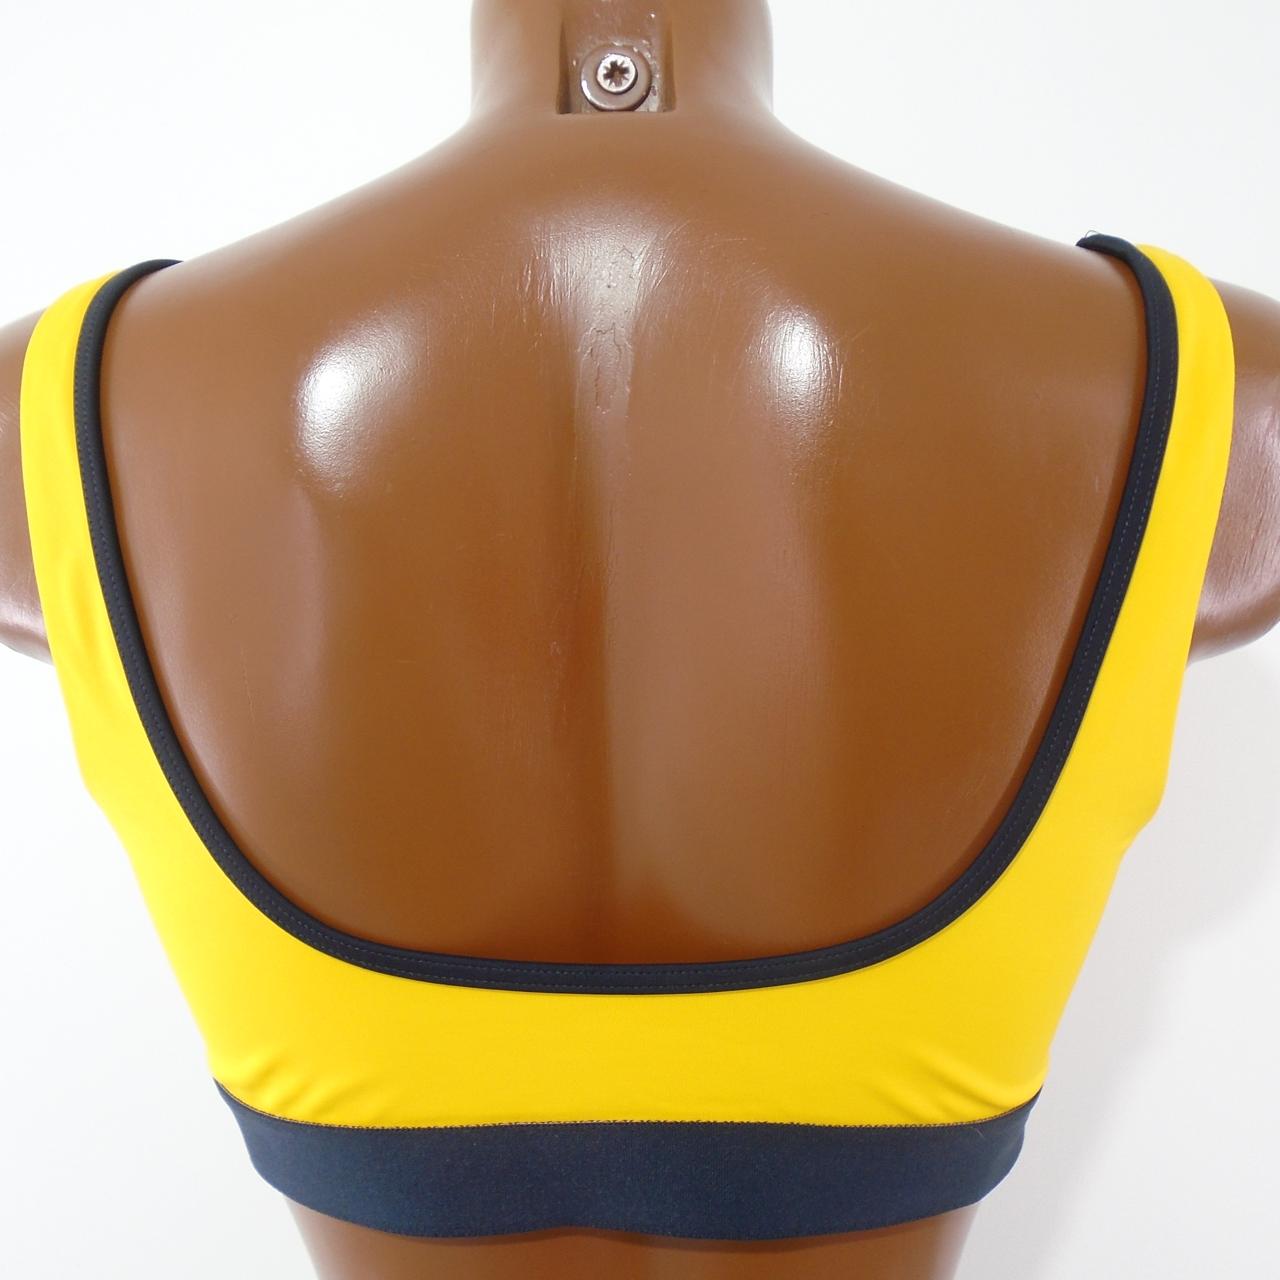 Women's Swimsuit Tommy Hilfiger. Yellow. L. Used. Satisfactory